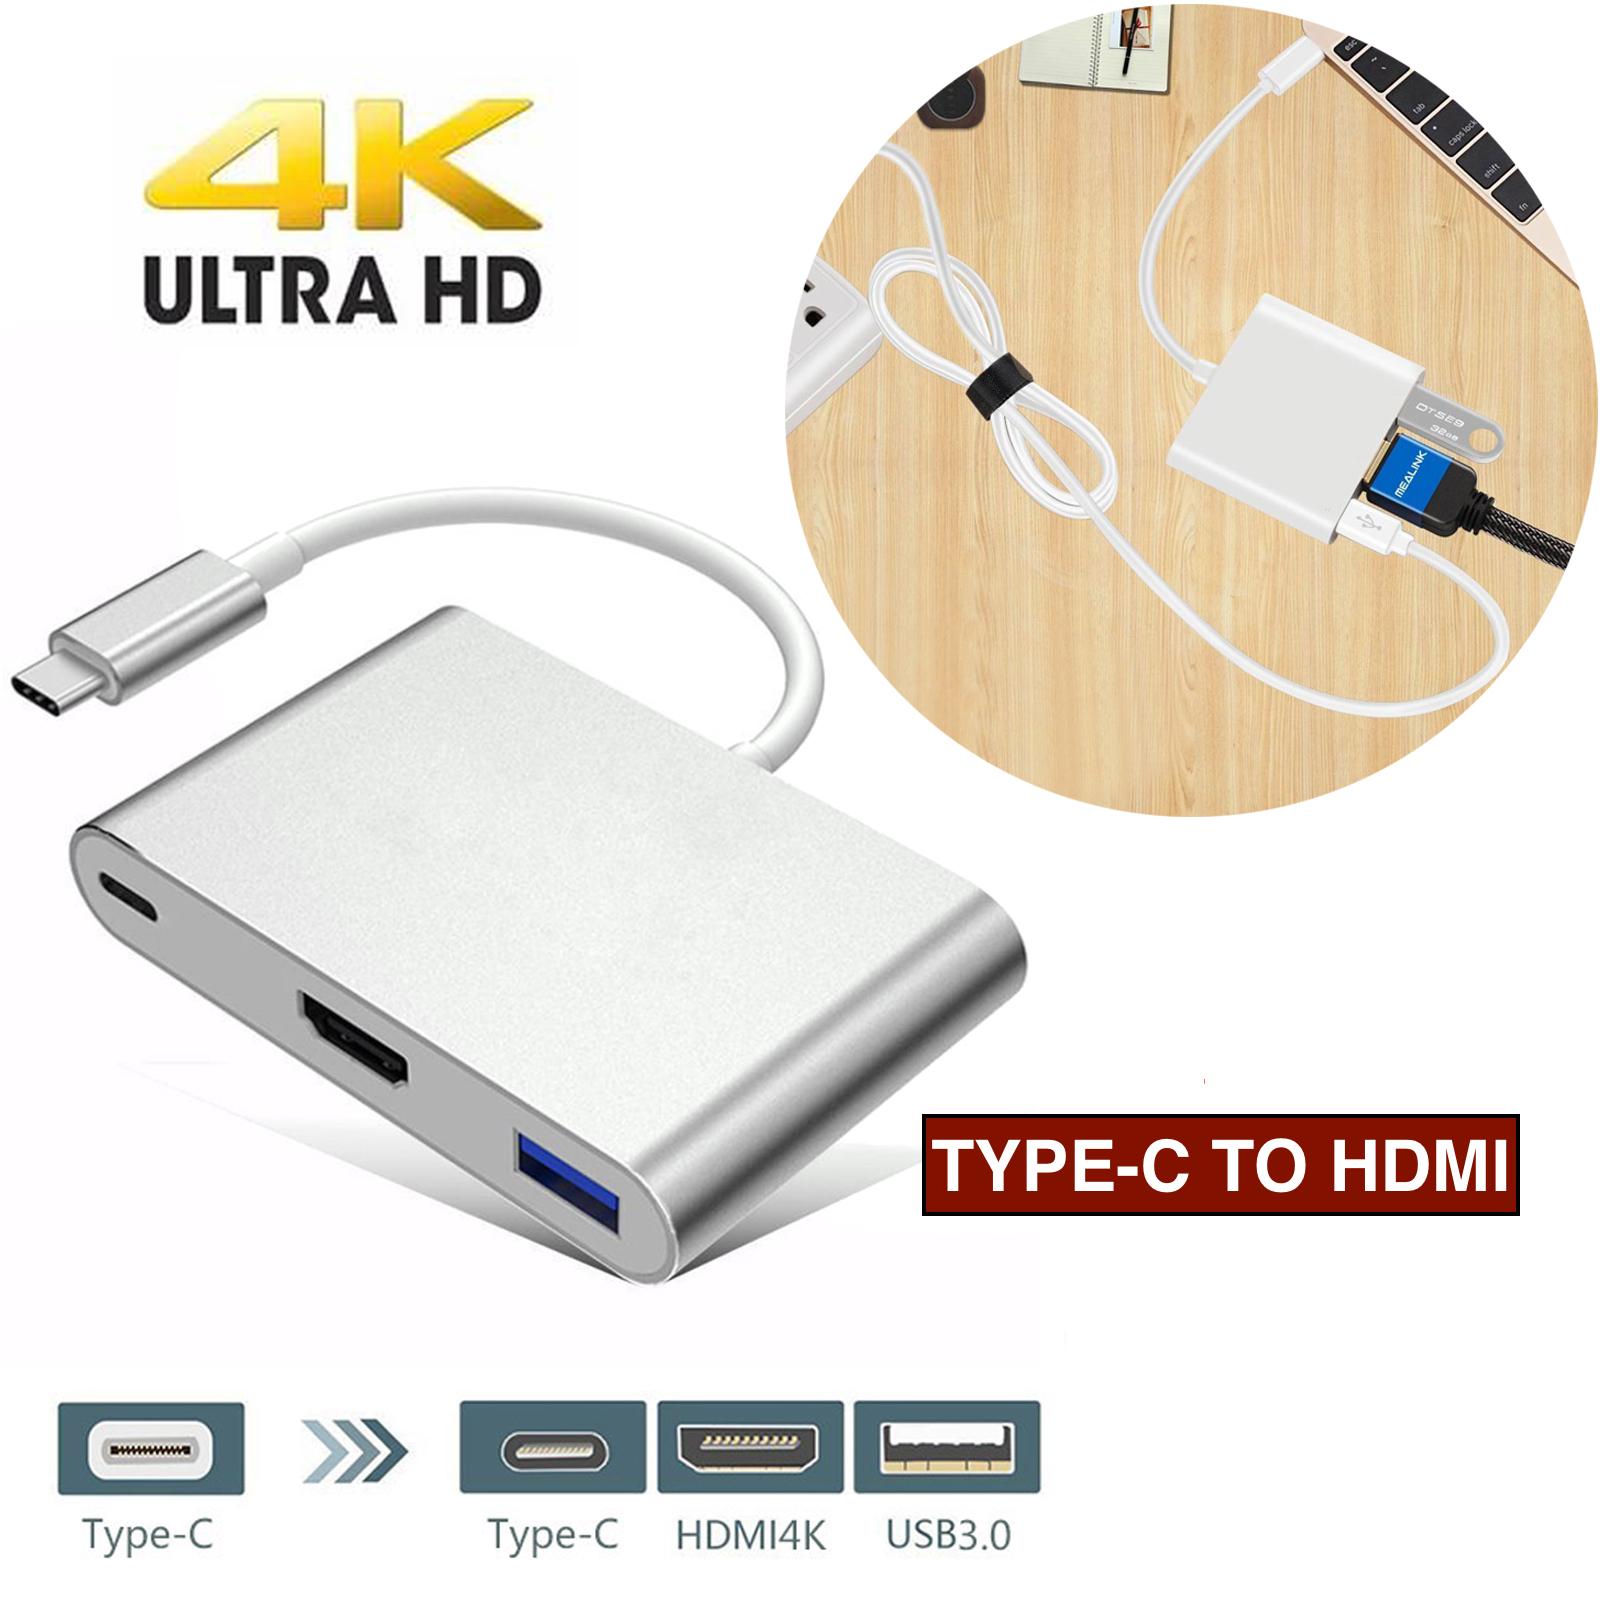 USB-C HDMI Hub, USB-C To HDMI Hub With USB 3.0 Port And USB-C Recharging Port For MacBook, Chromebook Pixel And More Type C Devices